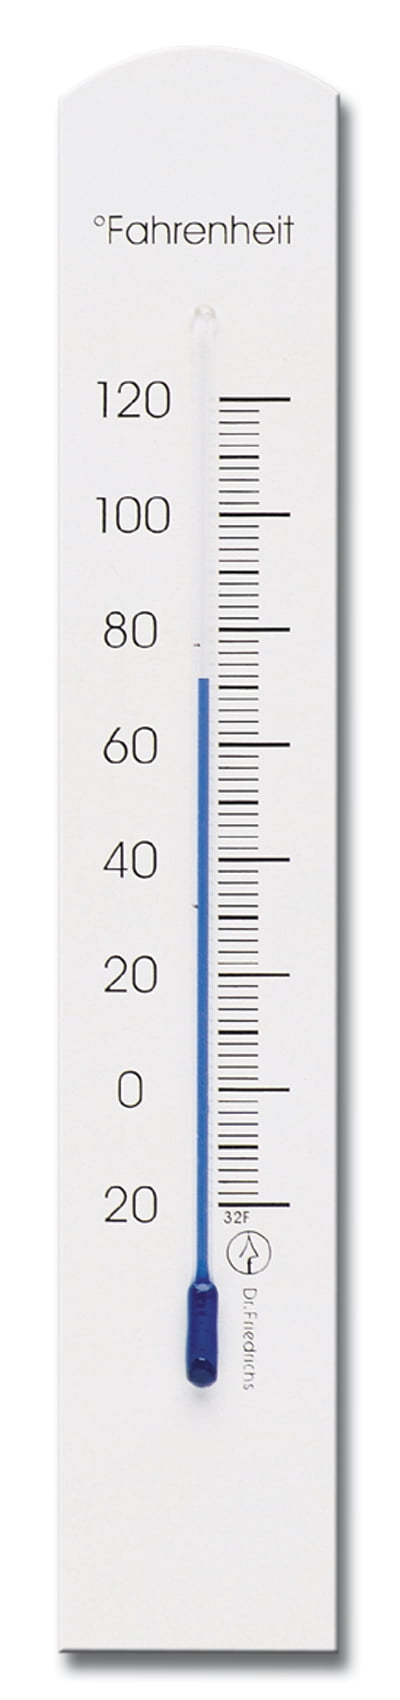 Wall Thermometer Fahrenheit Scale White Plastic 16 Inch Tall for sale online 